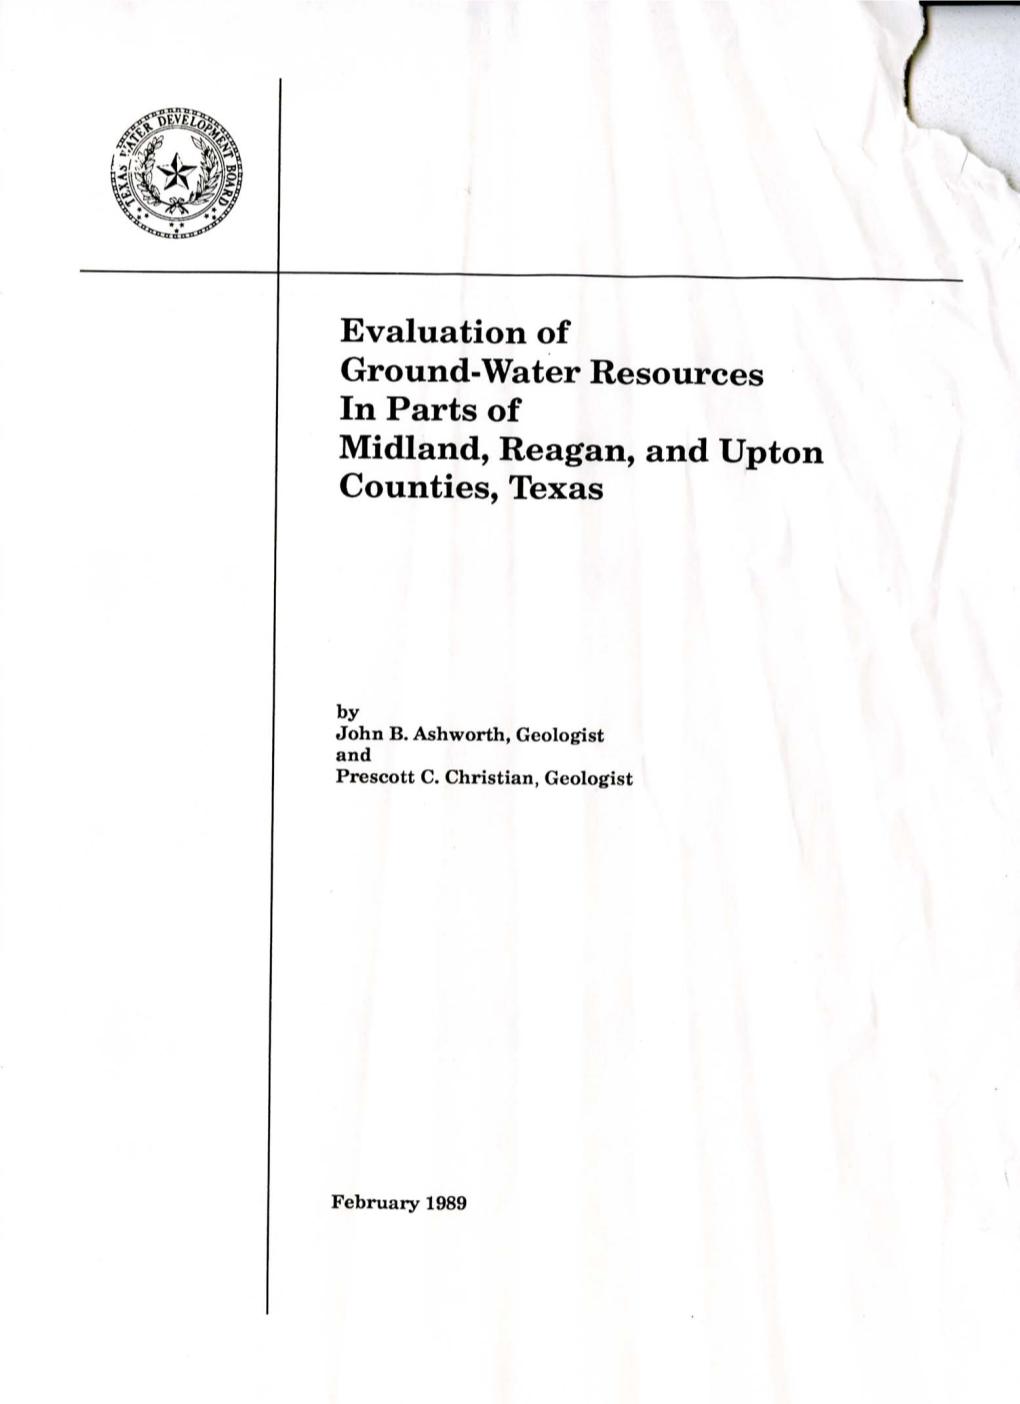 Evaluation of Ground-Water Resources in Parts of Midland, Reagan, and Upton Counties, Texas